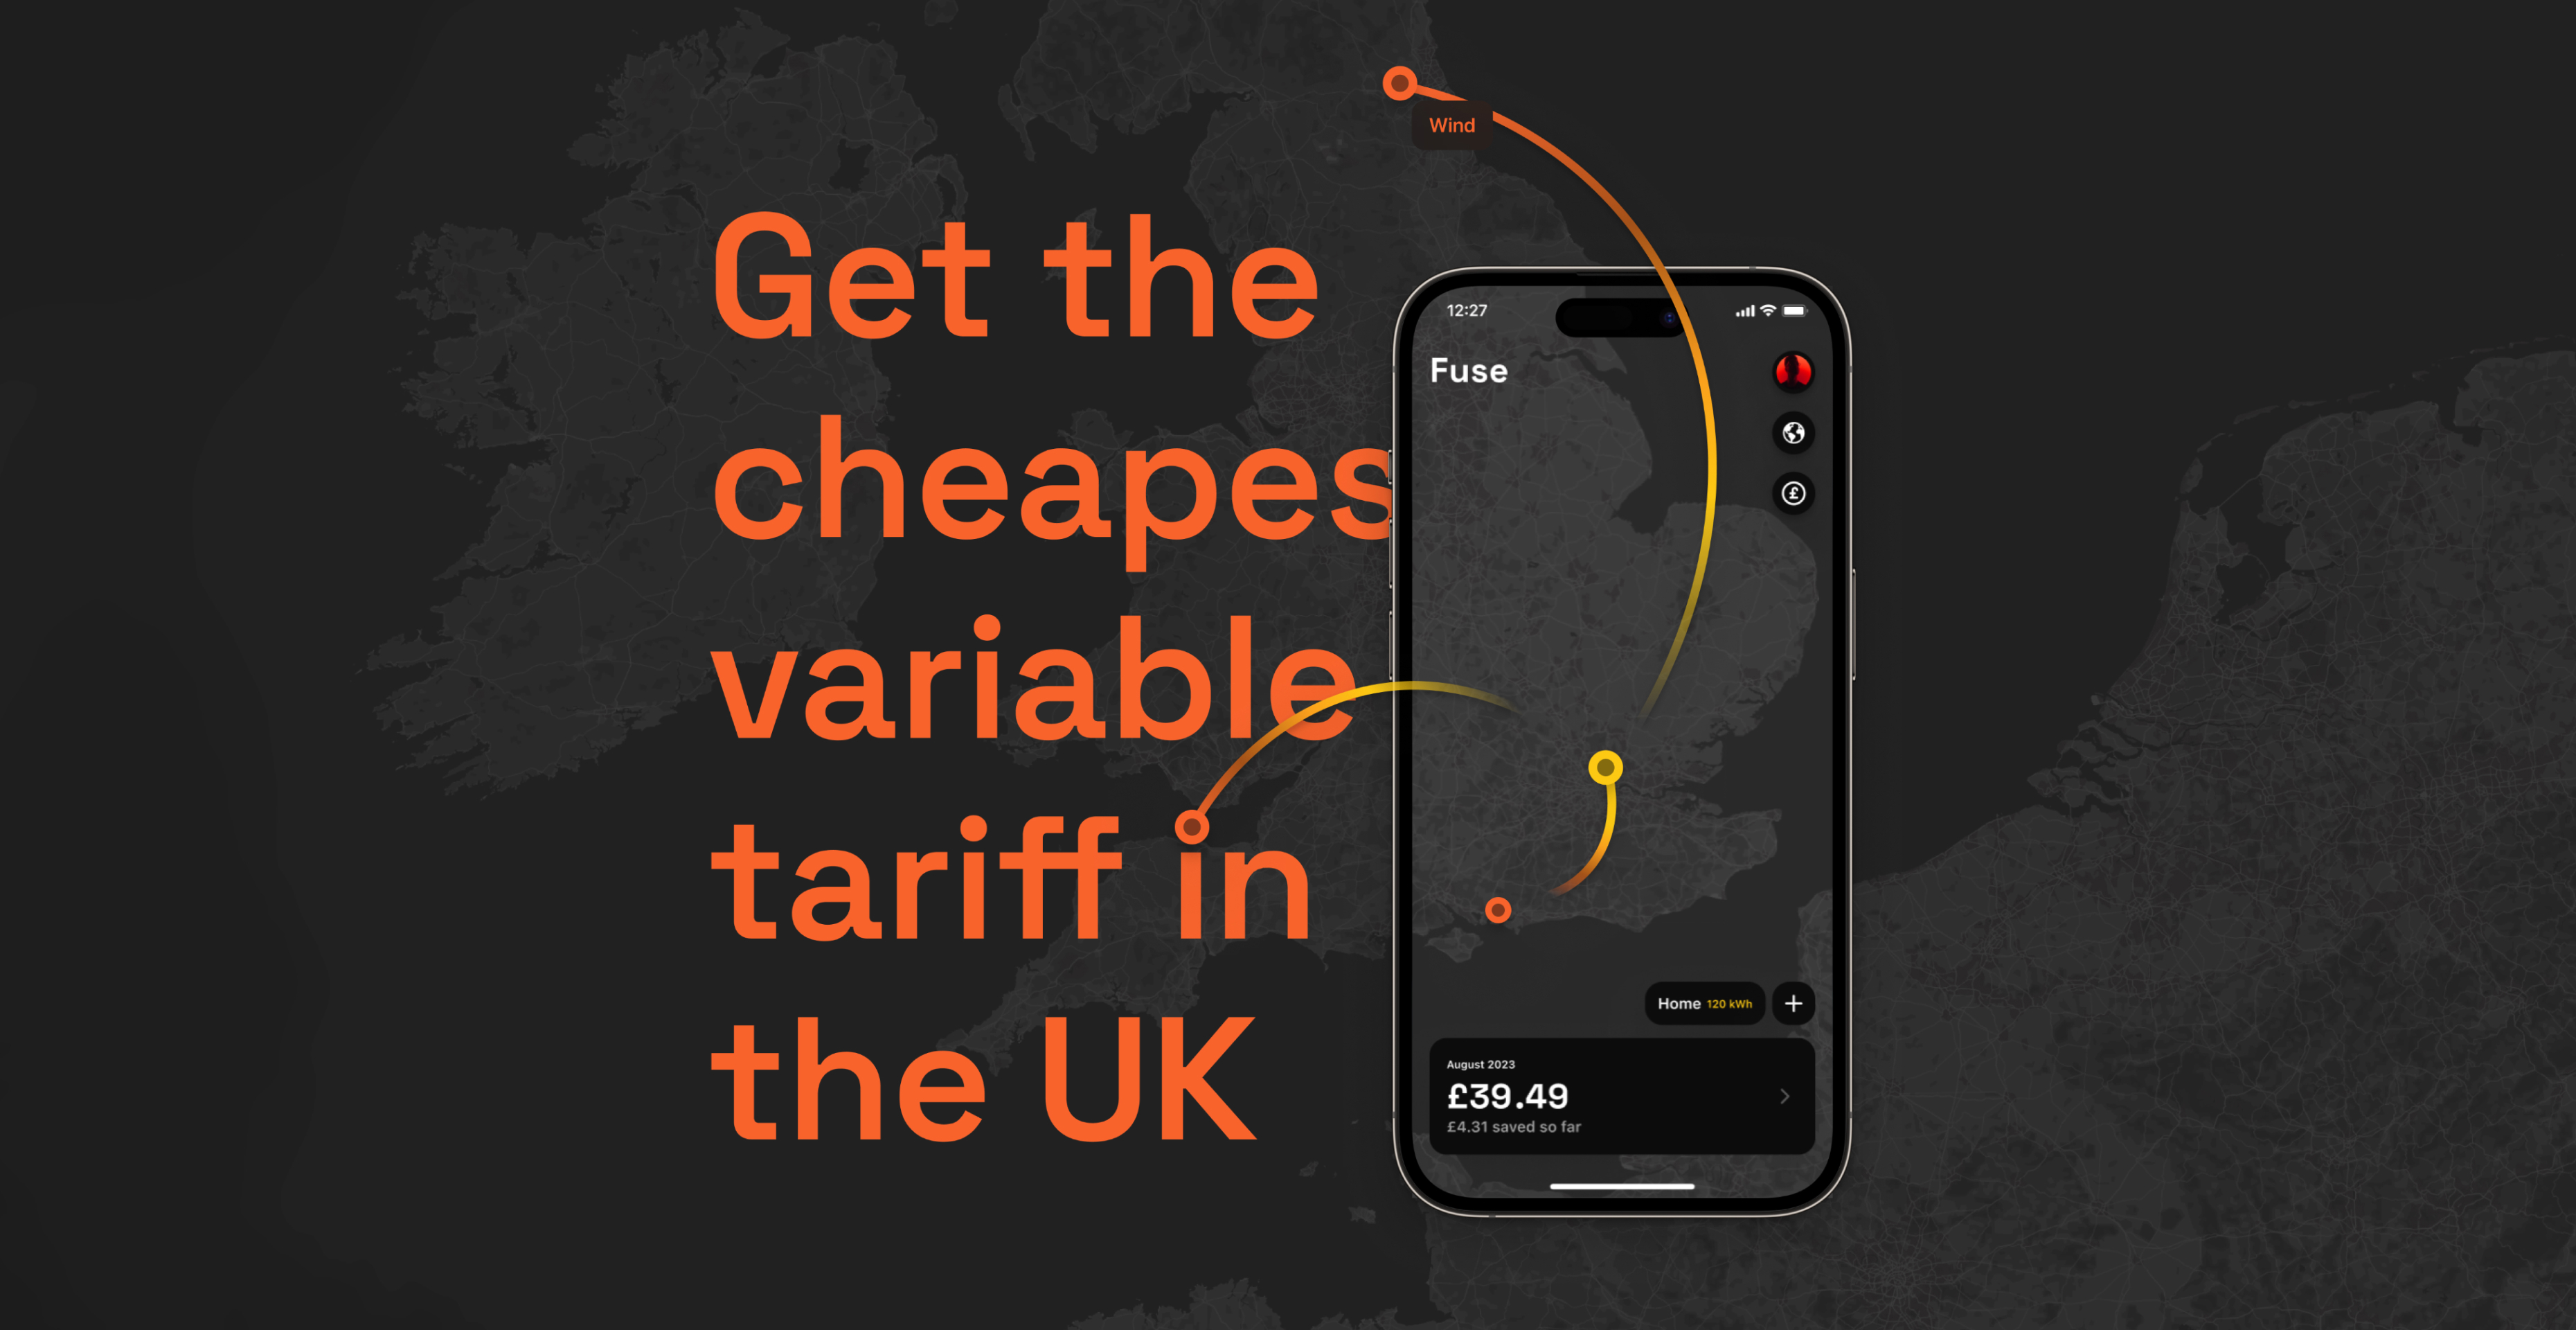 Save £50 with cheapert variable tariff in the UK